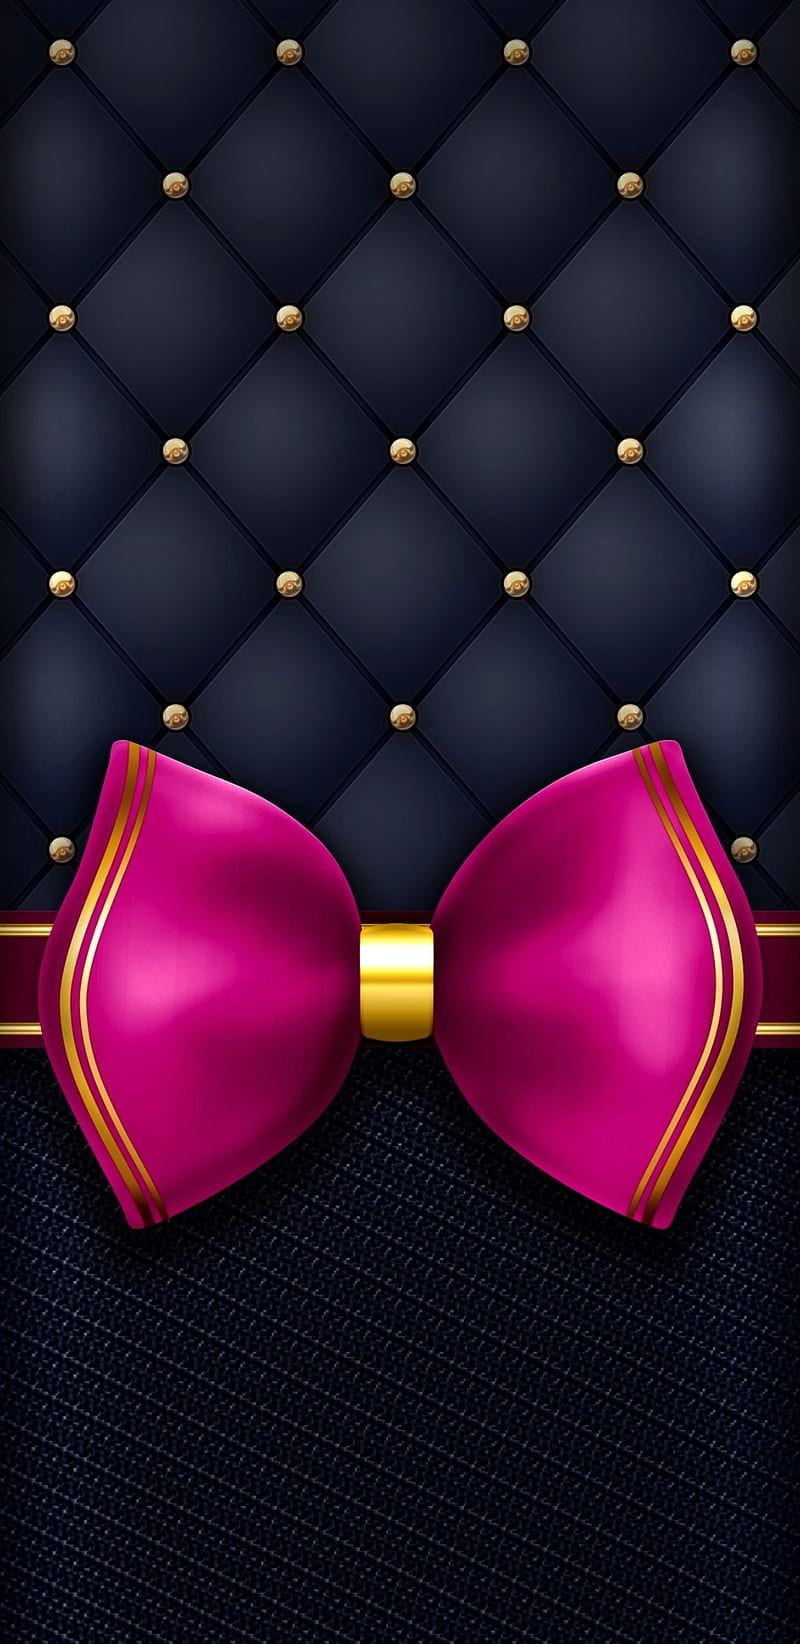 PinkNGoldBow, bonito, black, girly, gold, golden, now, padded, pink, pretty, HD phone wallpaper